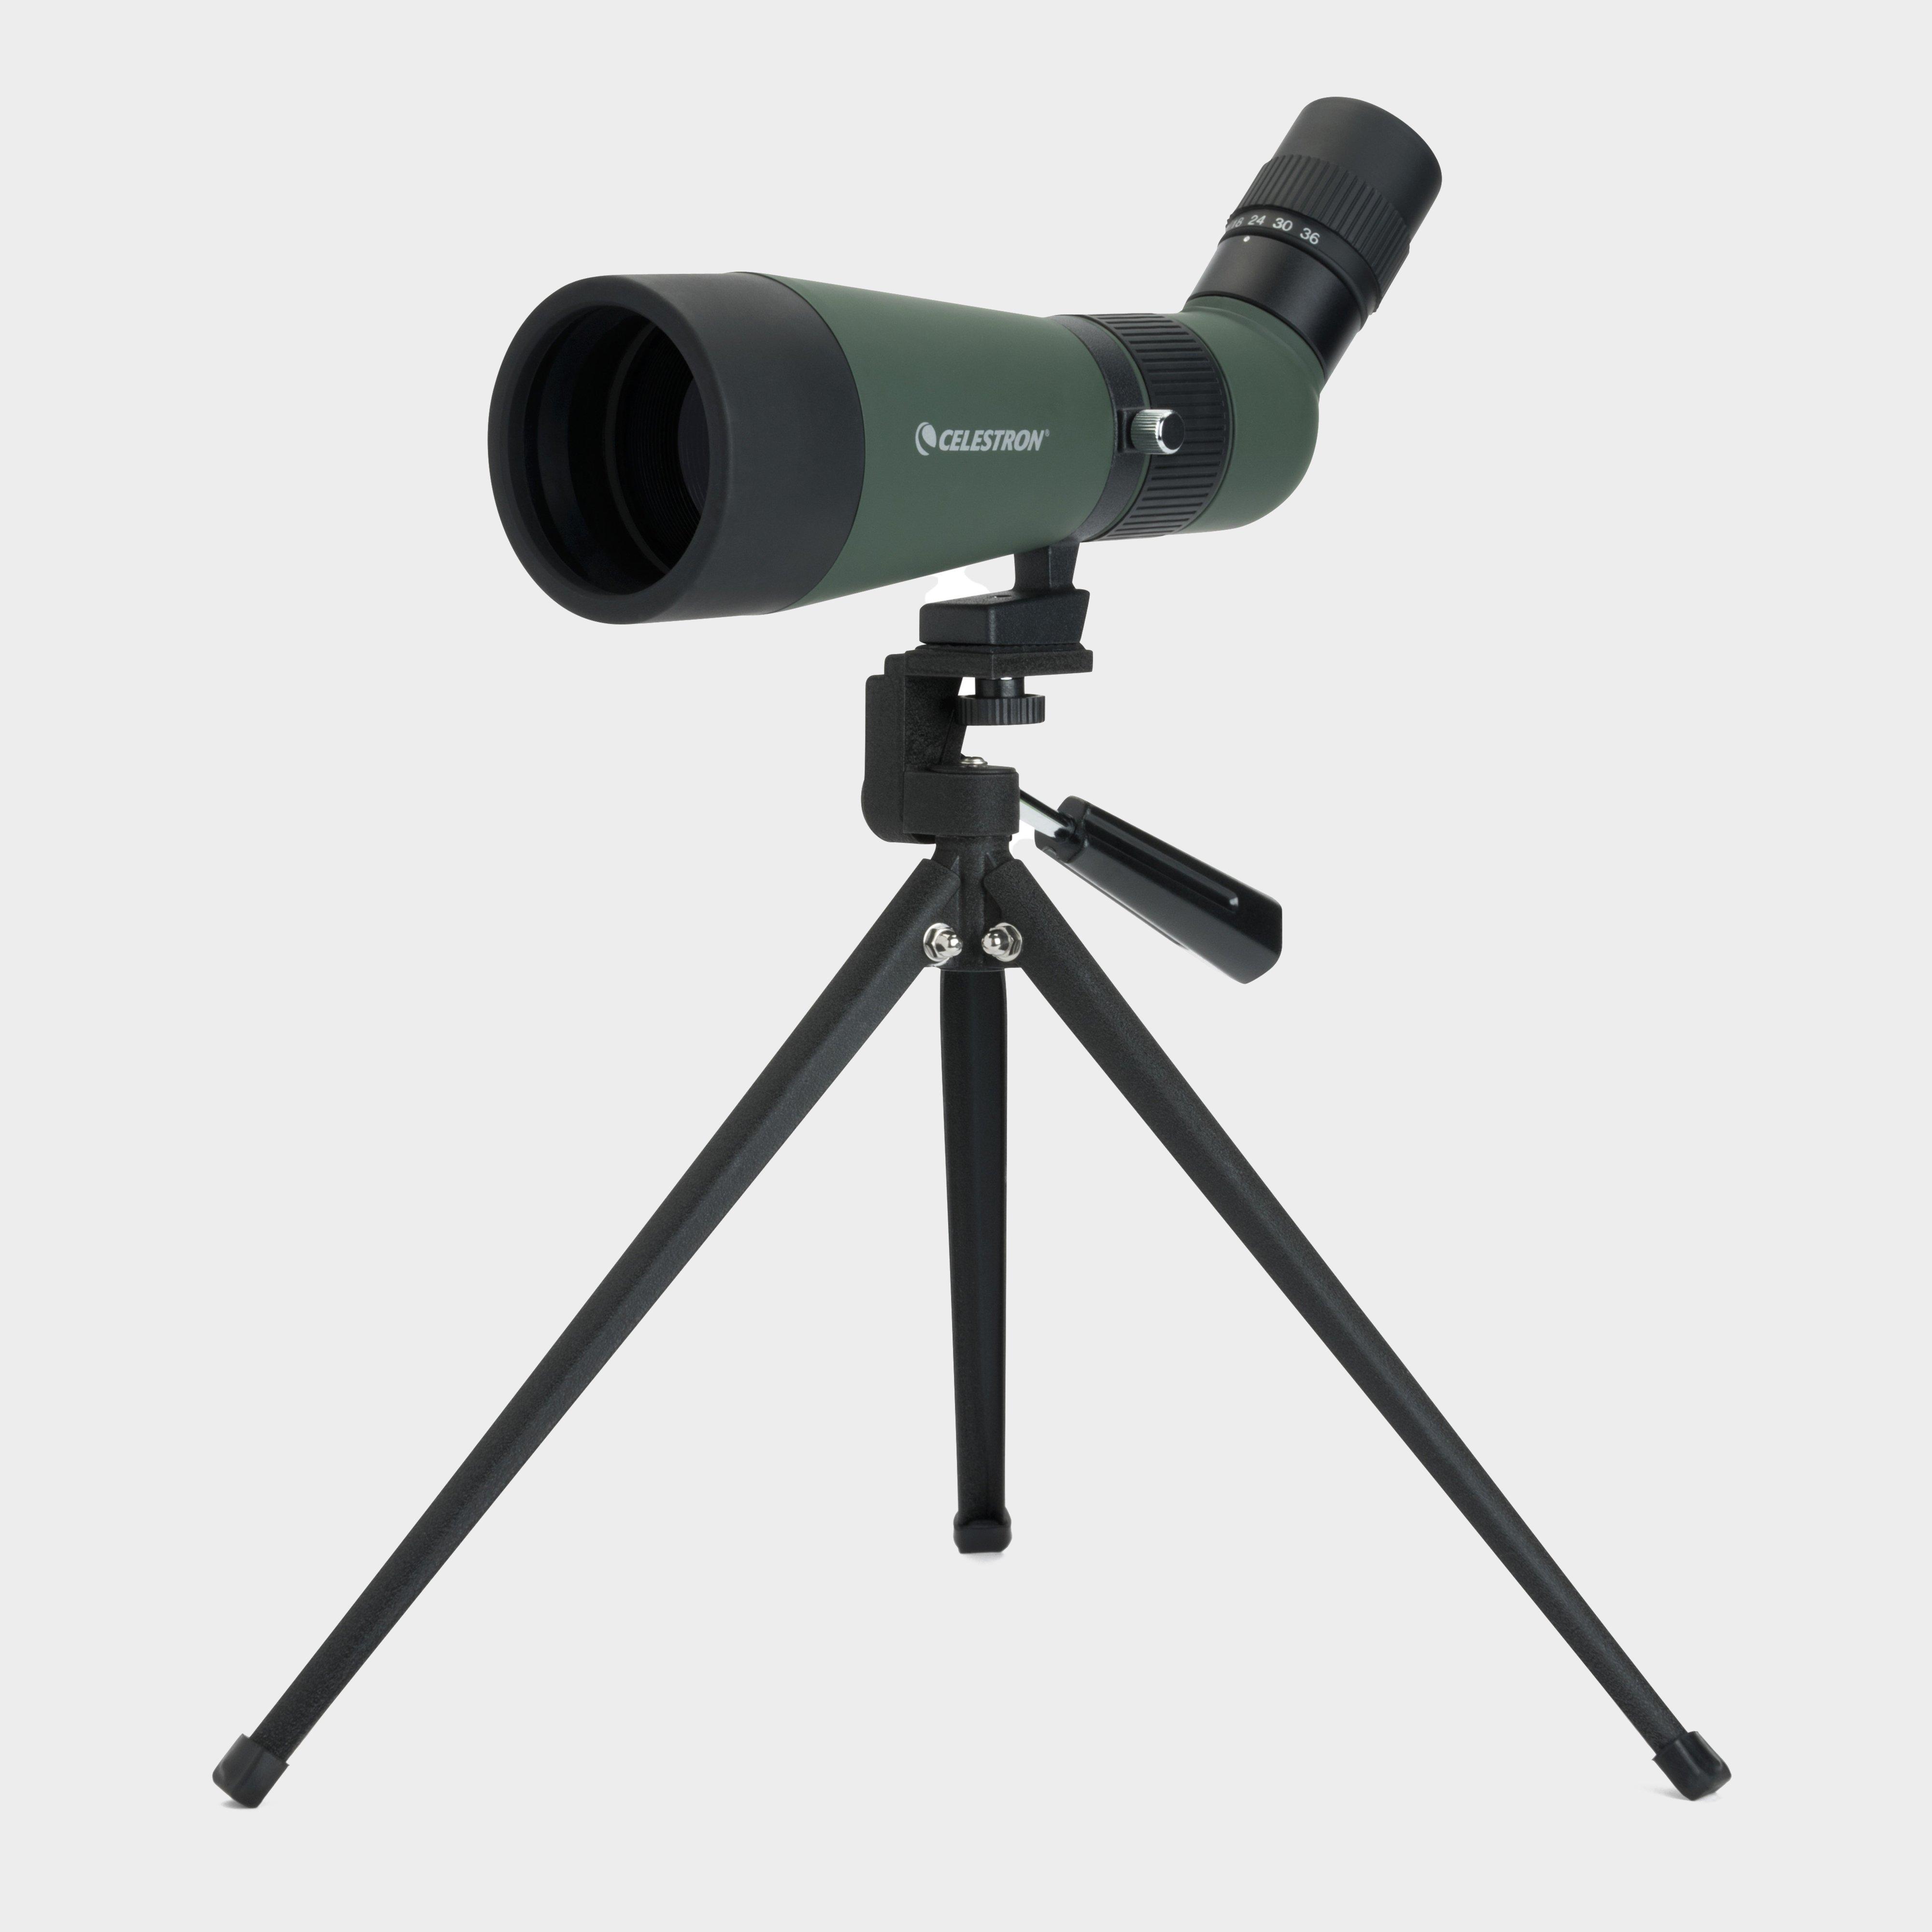 LandScout 12-36 x 60mm Spotting Scope with Smartphone Adapter, Green